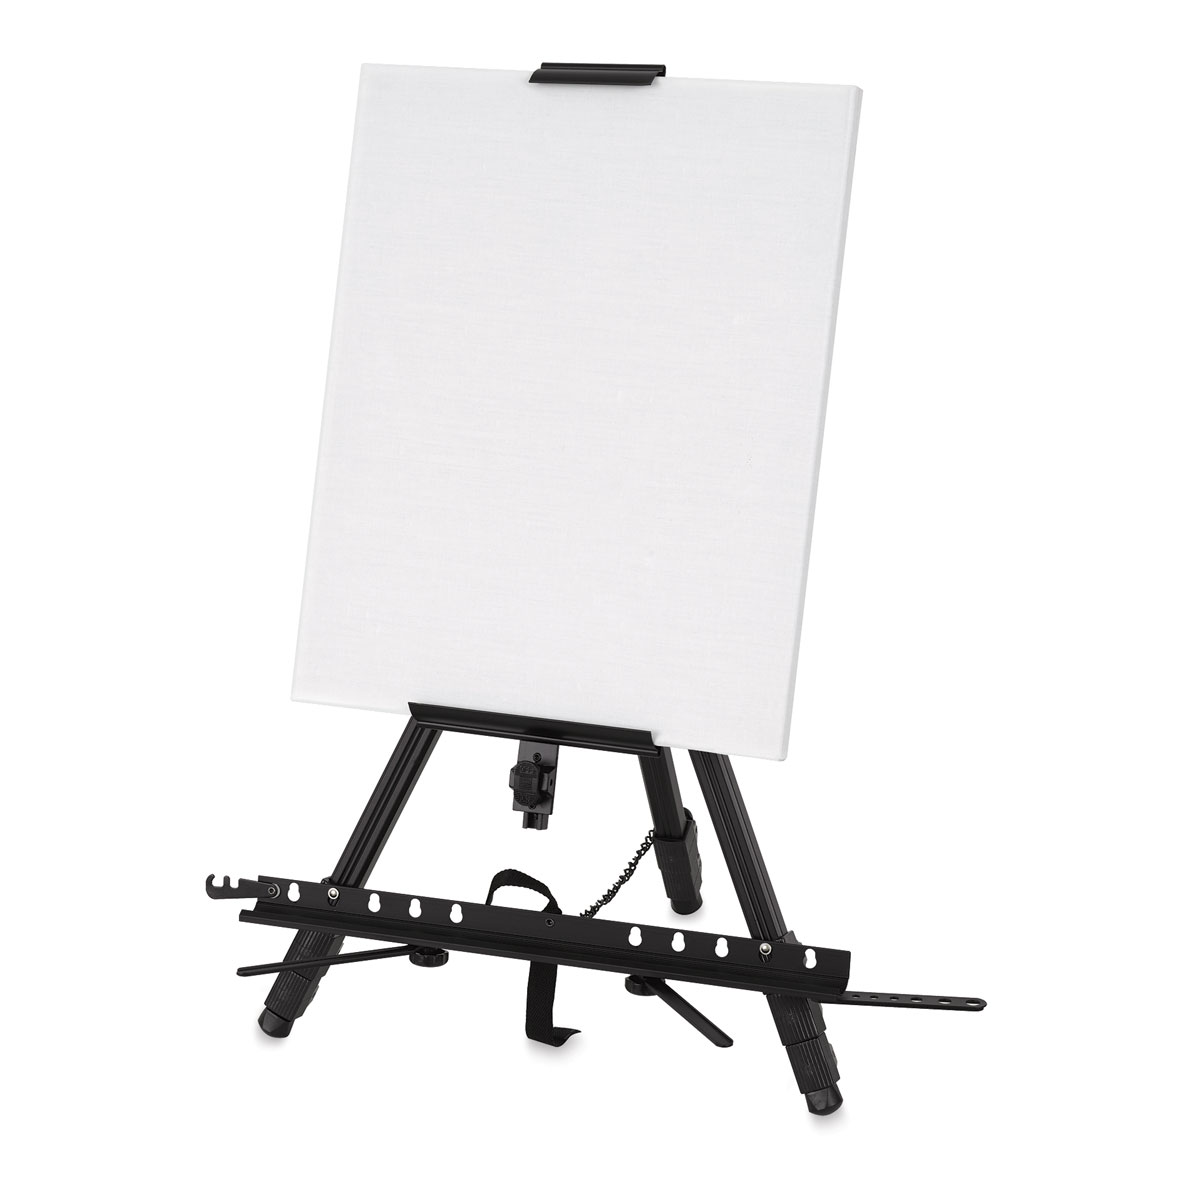 80 Aluminum Artist Watercolor Field Display Easel Stand